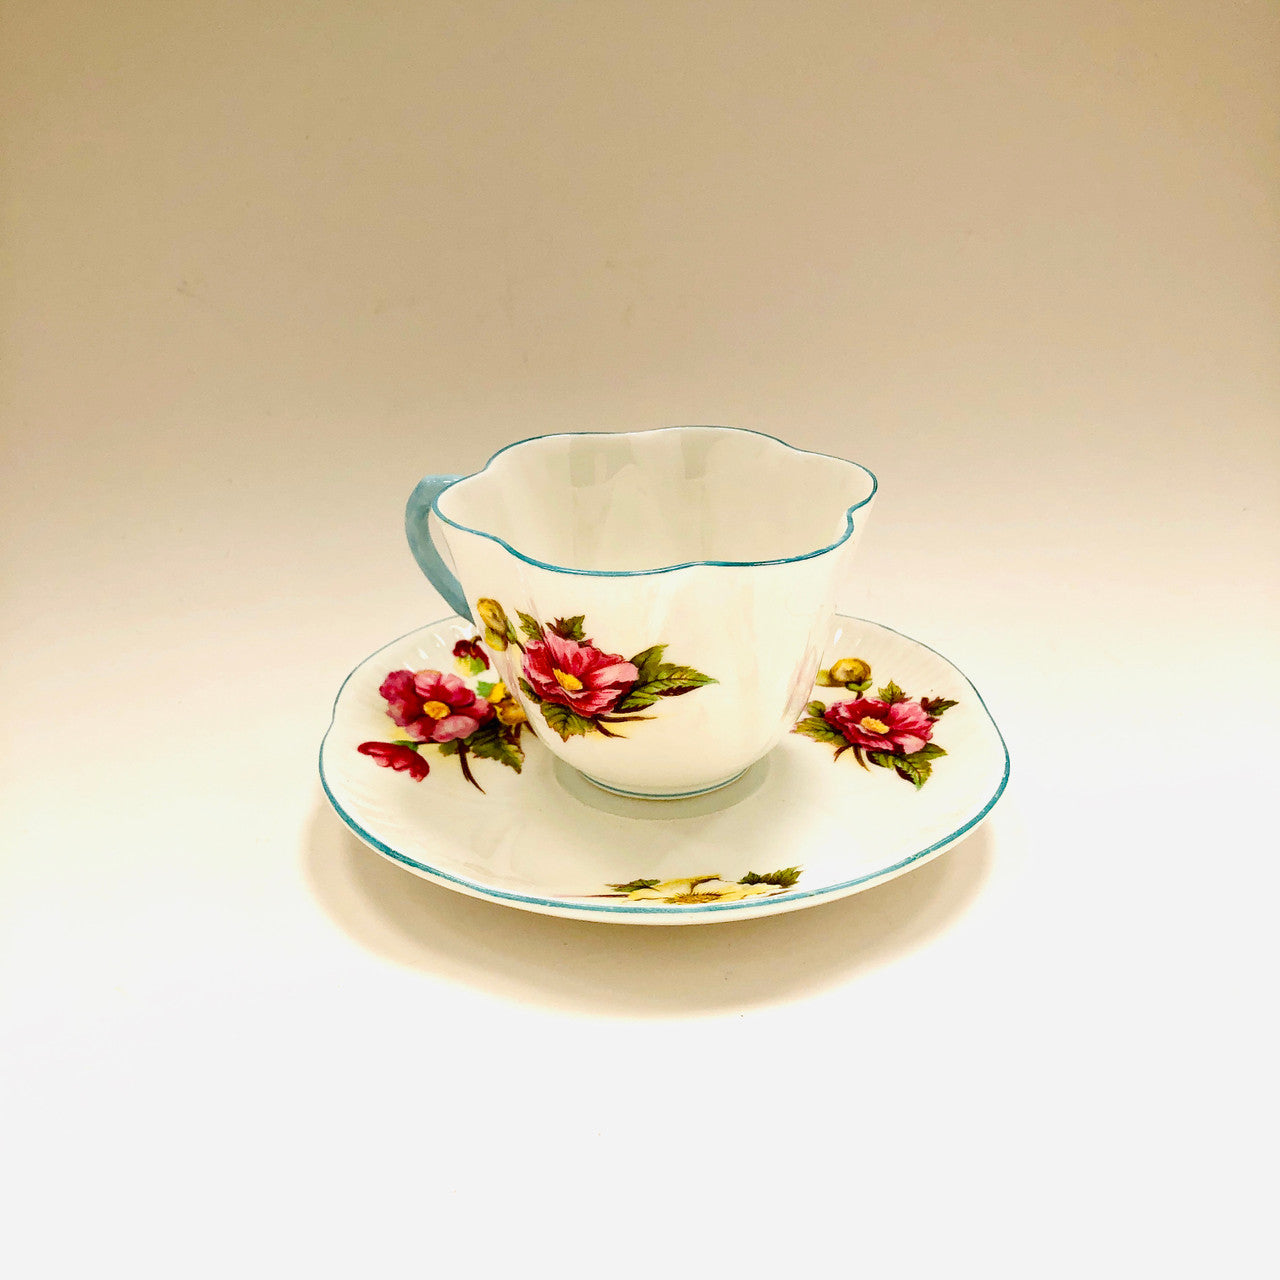 Shelley, Dainty, Begonia, Floral with Blue Trim, Cup, Tea cup